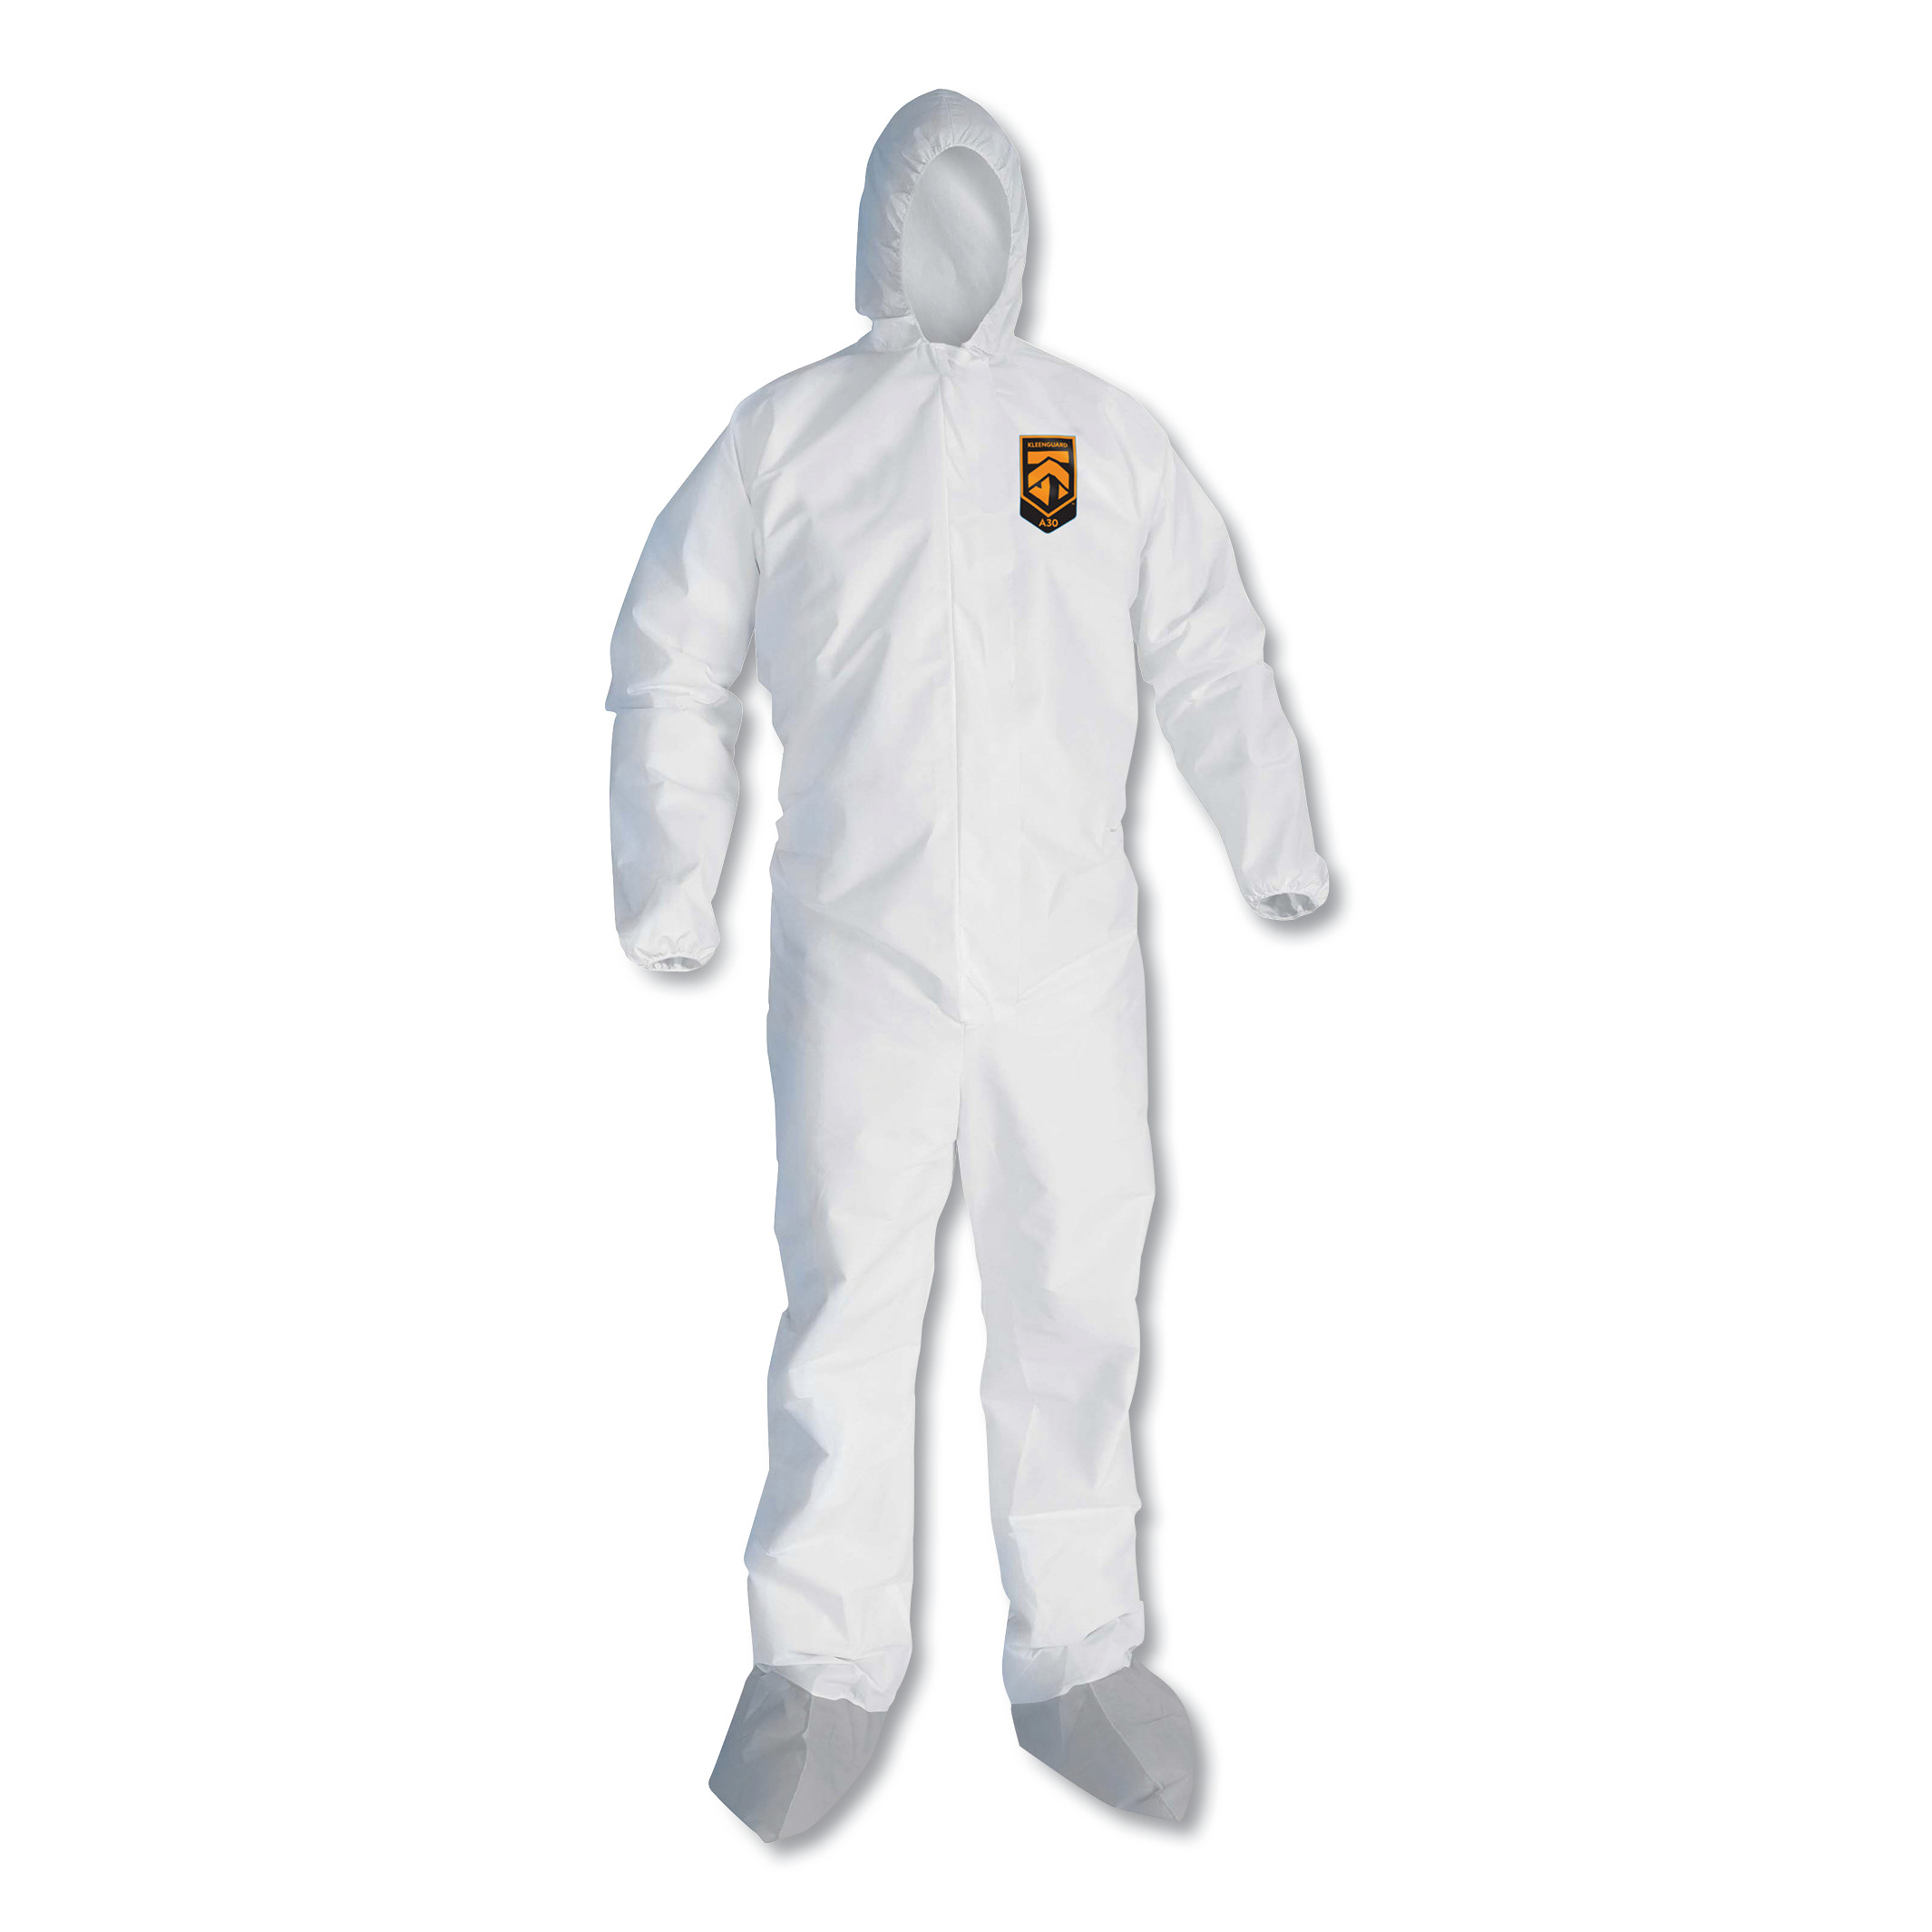  KleenGuard 48962 A30 Breathable Splash and Particle Protection Coveralls, Medium, White, 25/CT (KCC48962) 